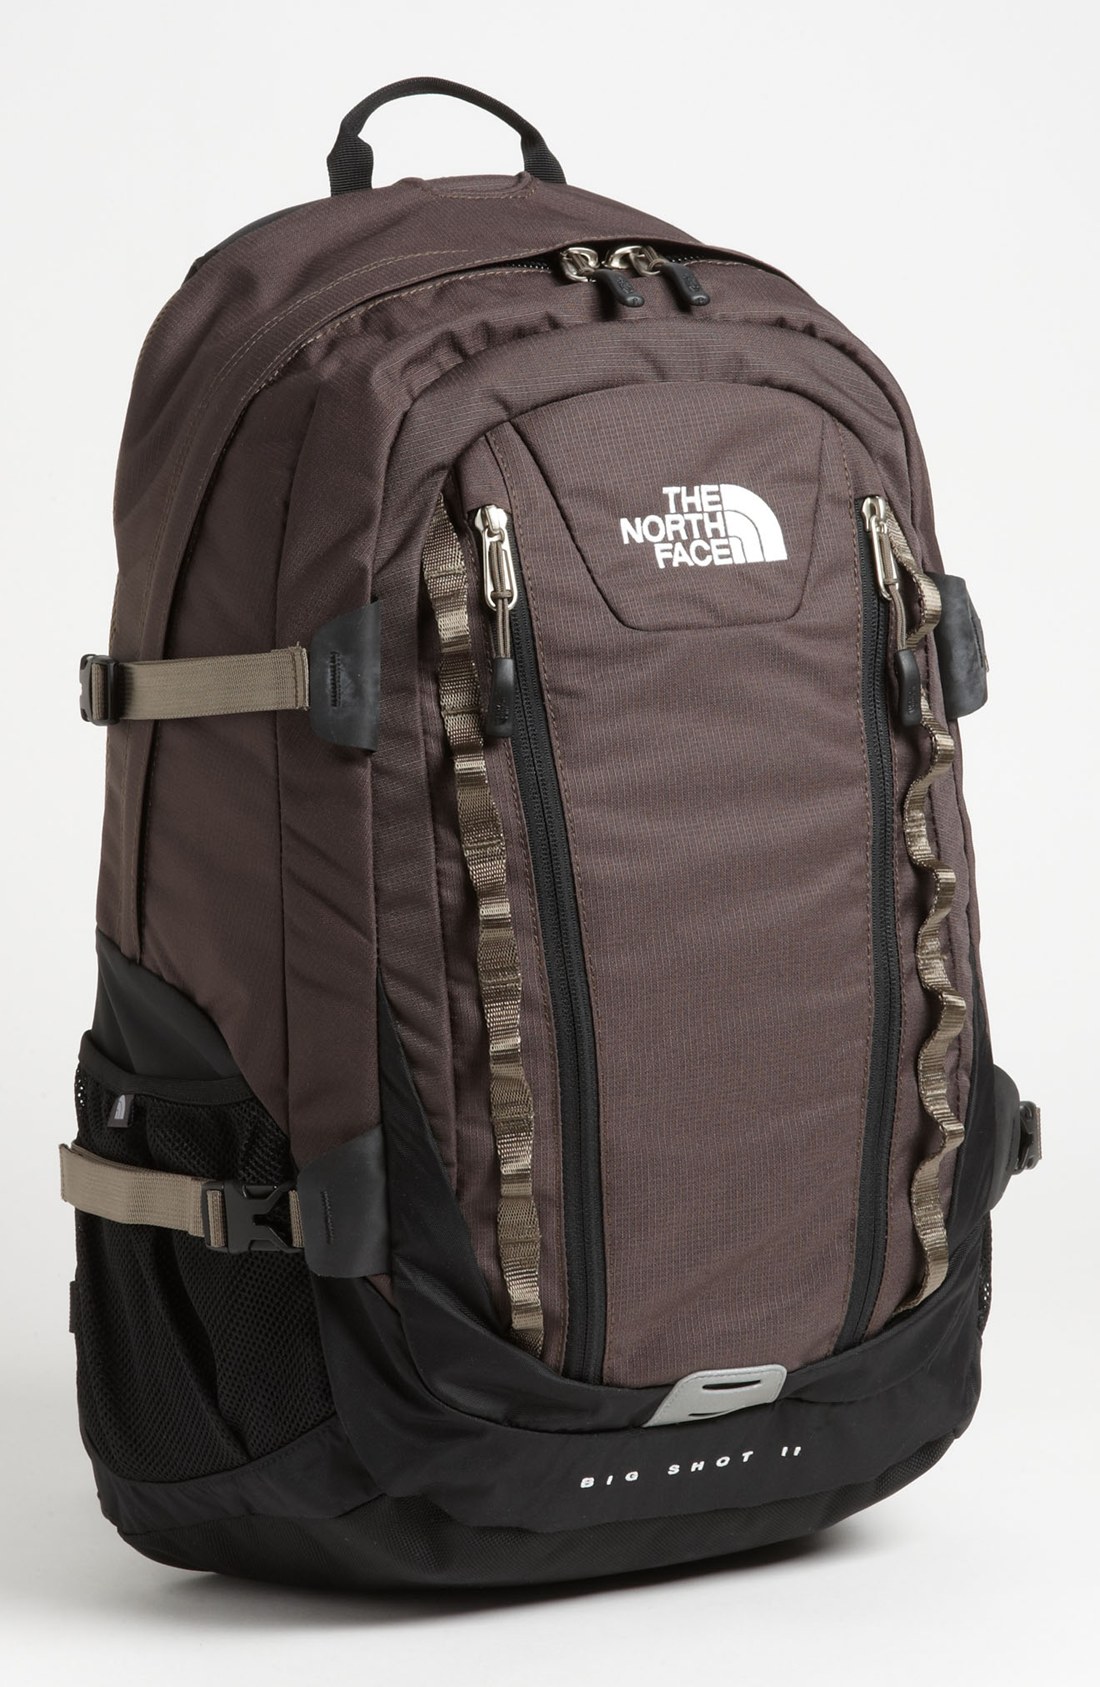 North Face Backpack Sale :: Keweenaw Bay Indian Community